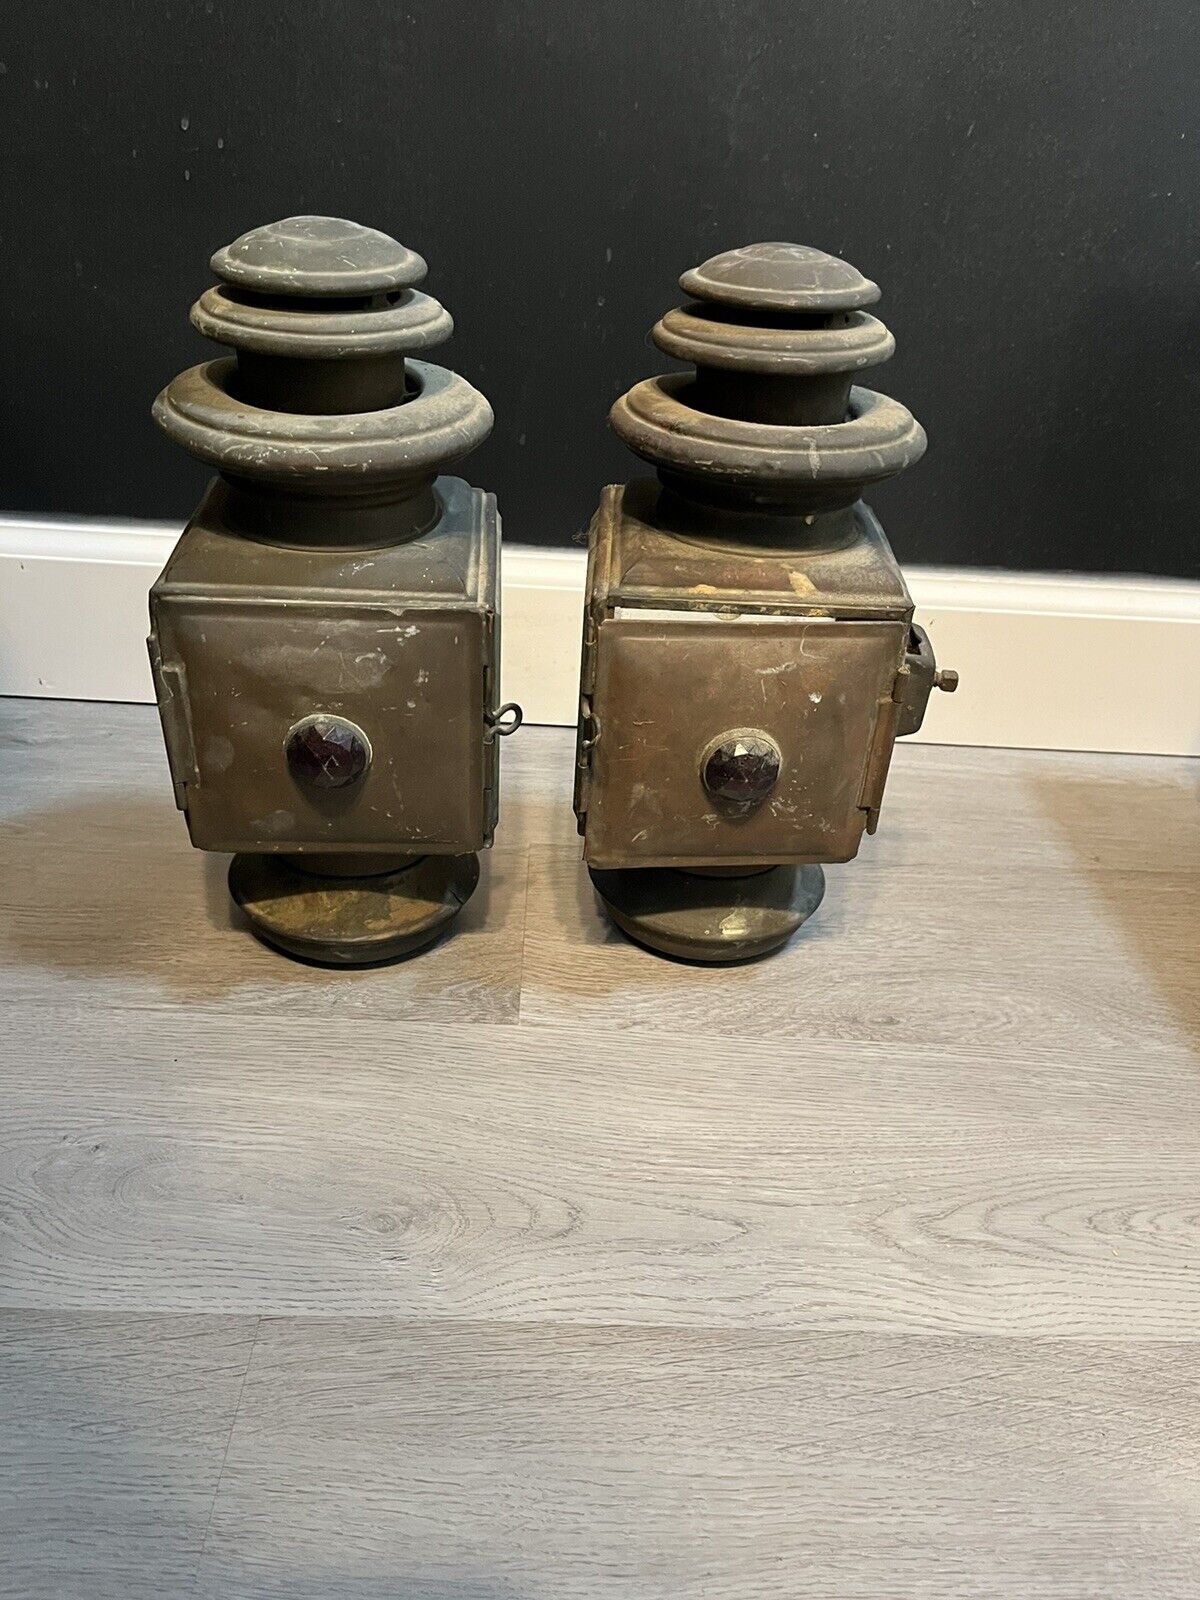 Ford Model T Brass Headlamps 1913 1914?